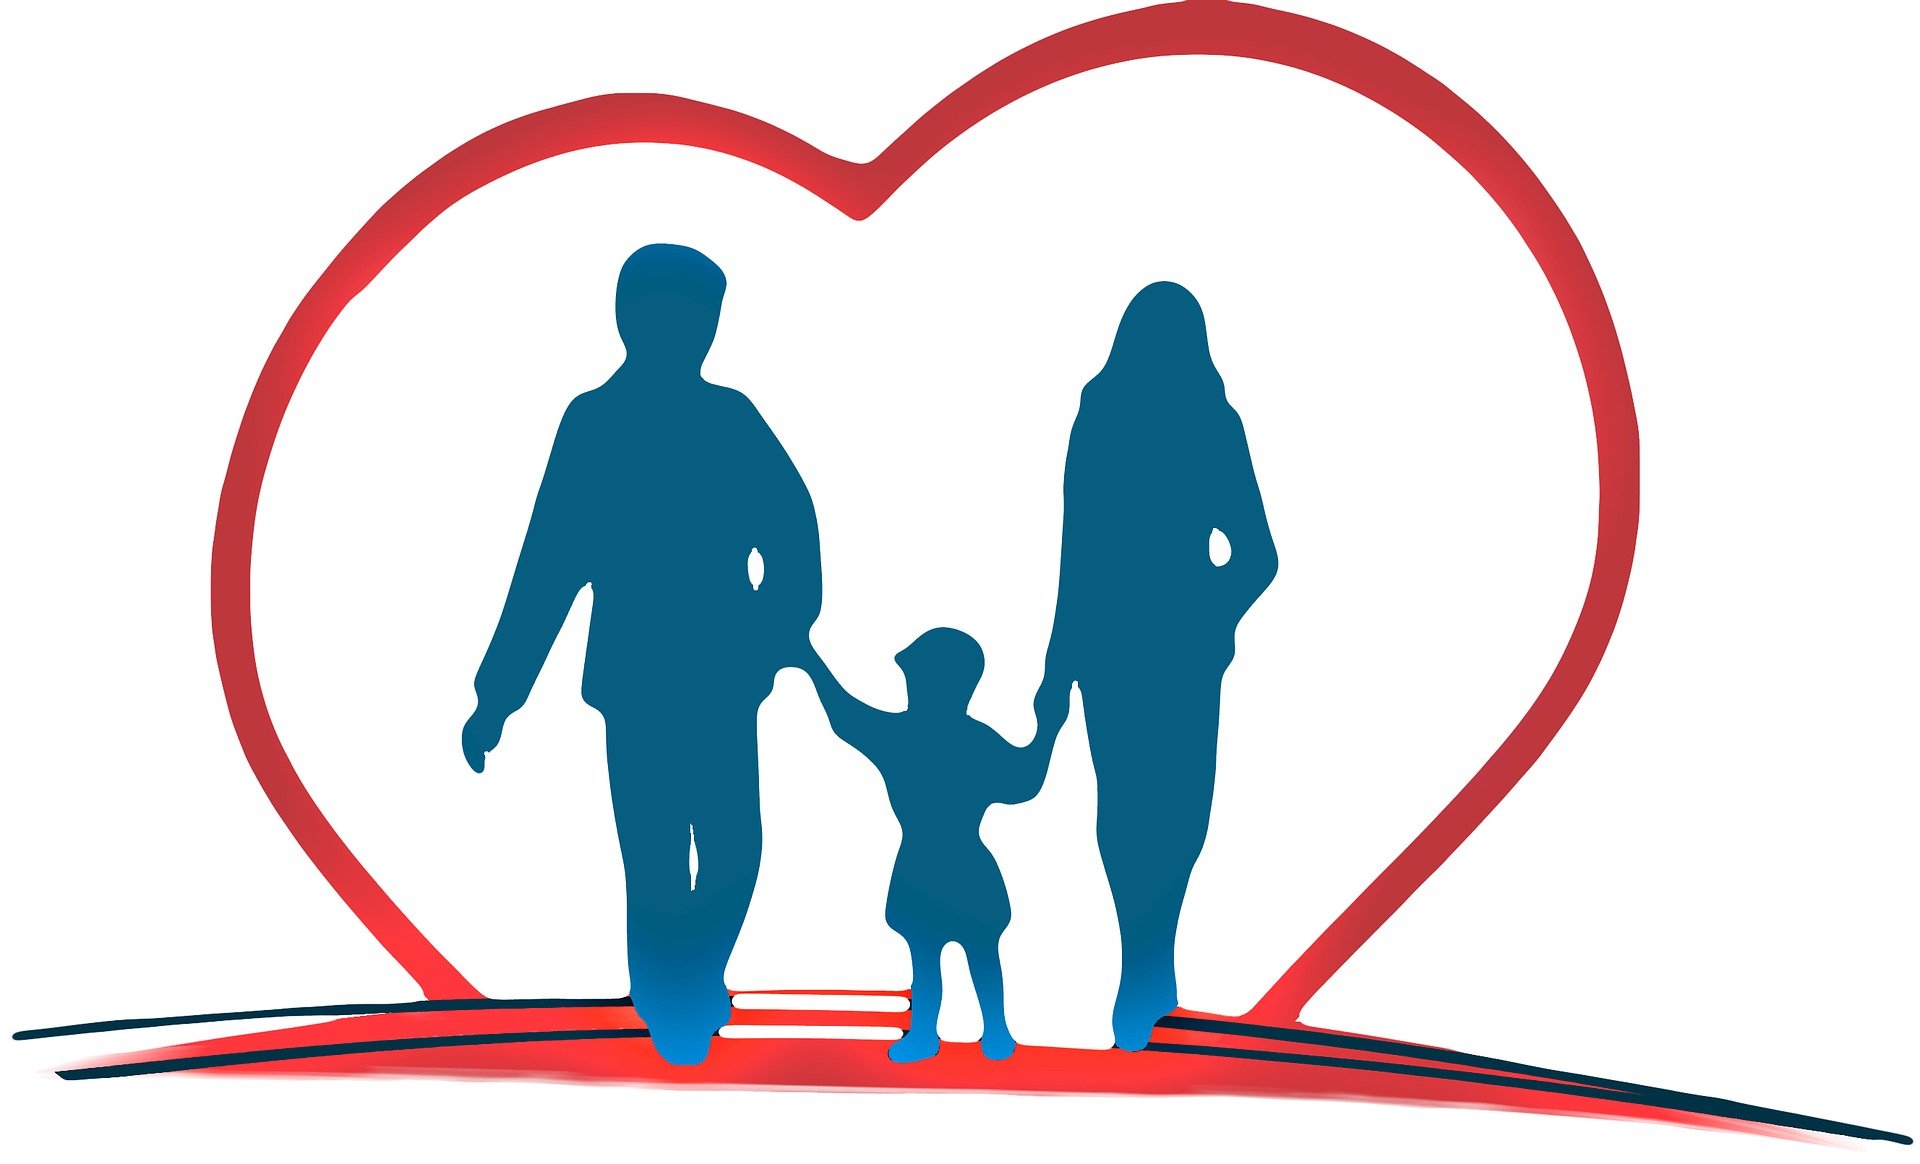 Silhouette of family in a heart